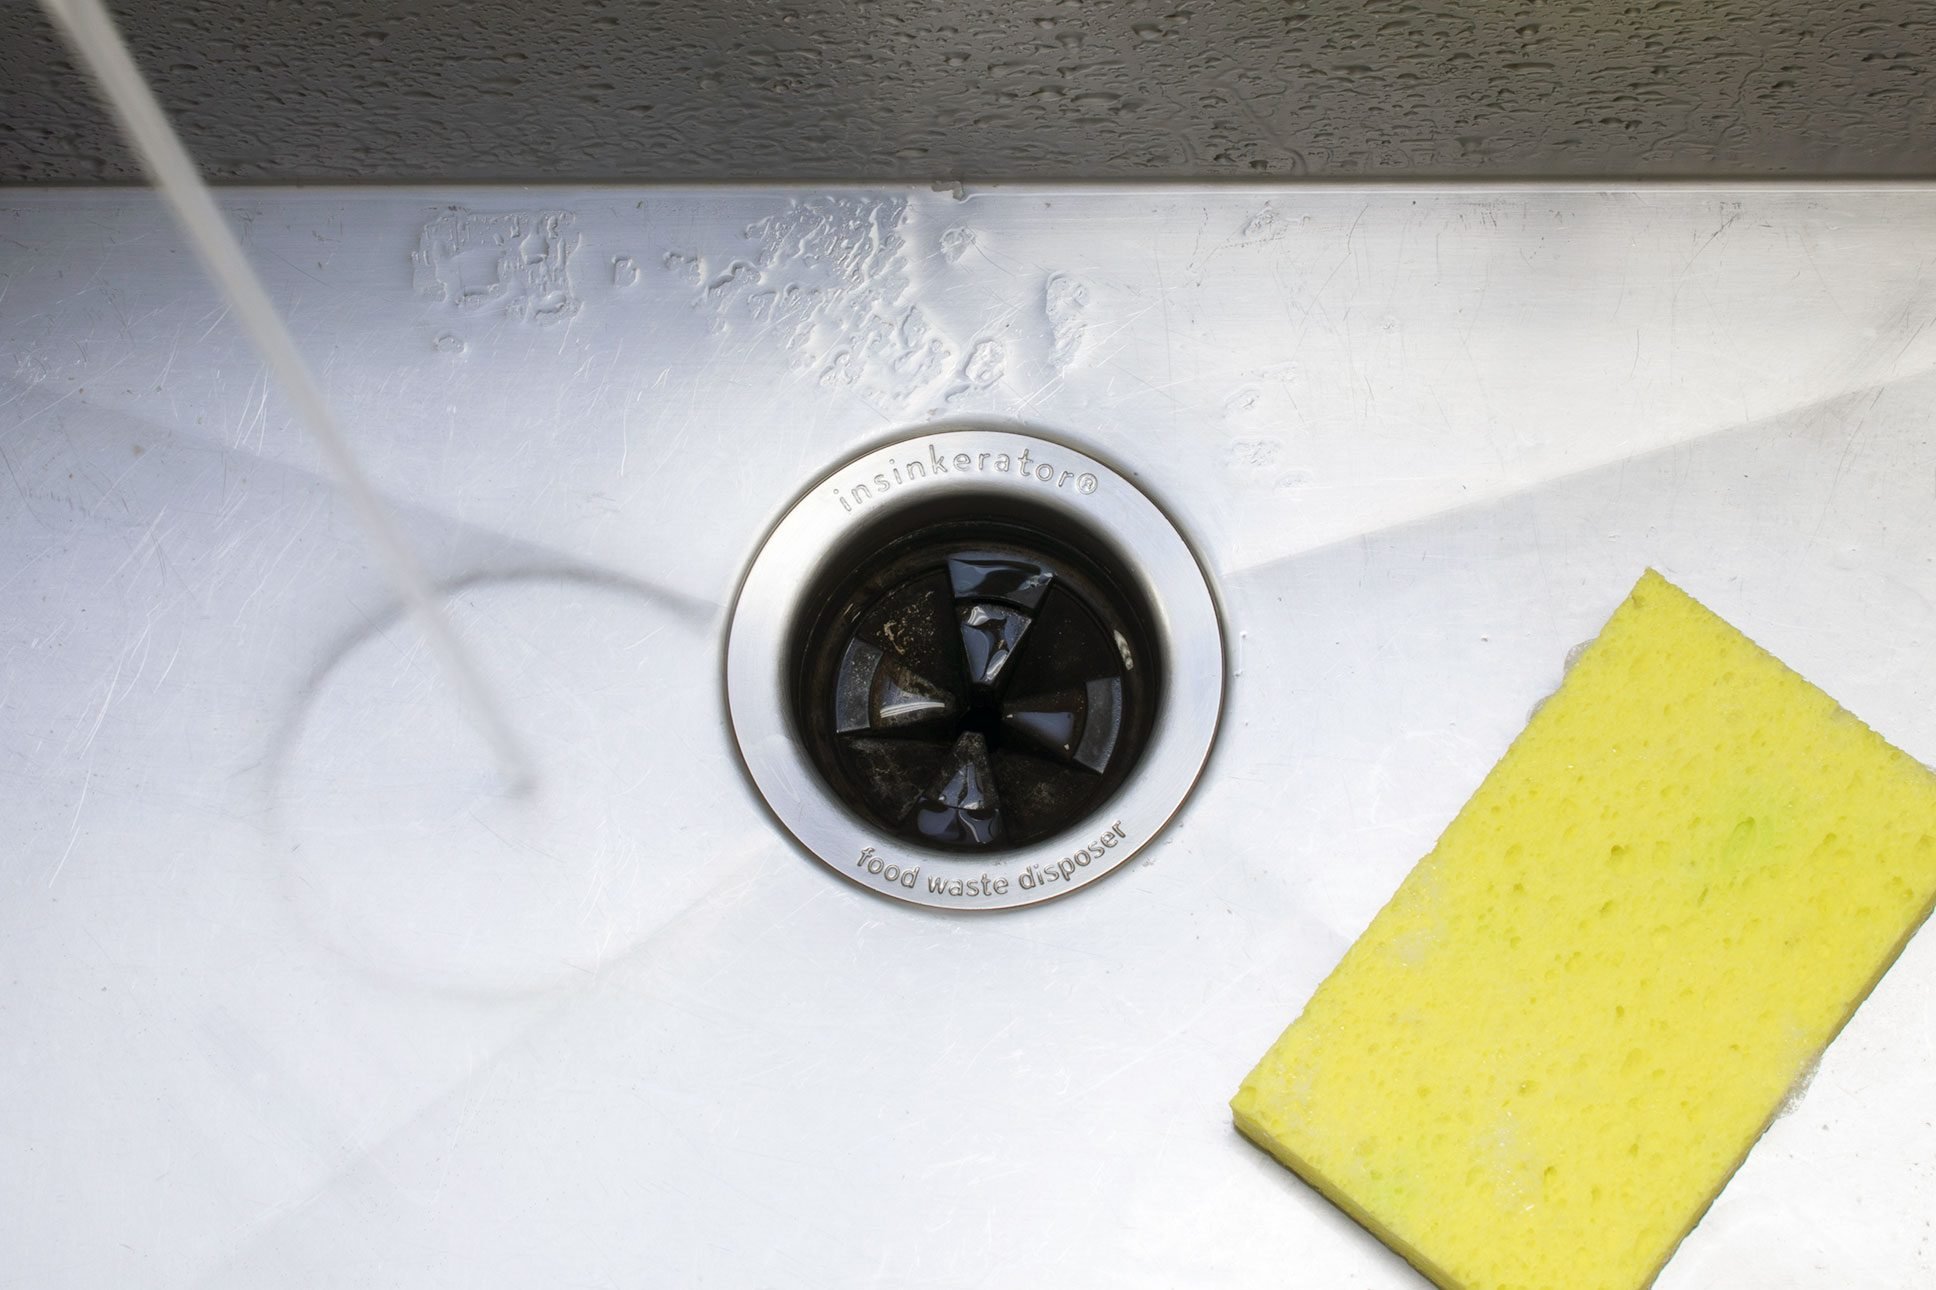 How to Deodorize and Clean a Garbage Disposal